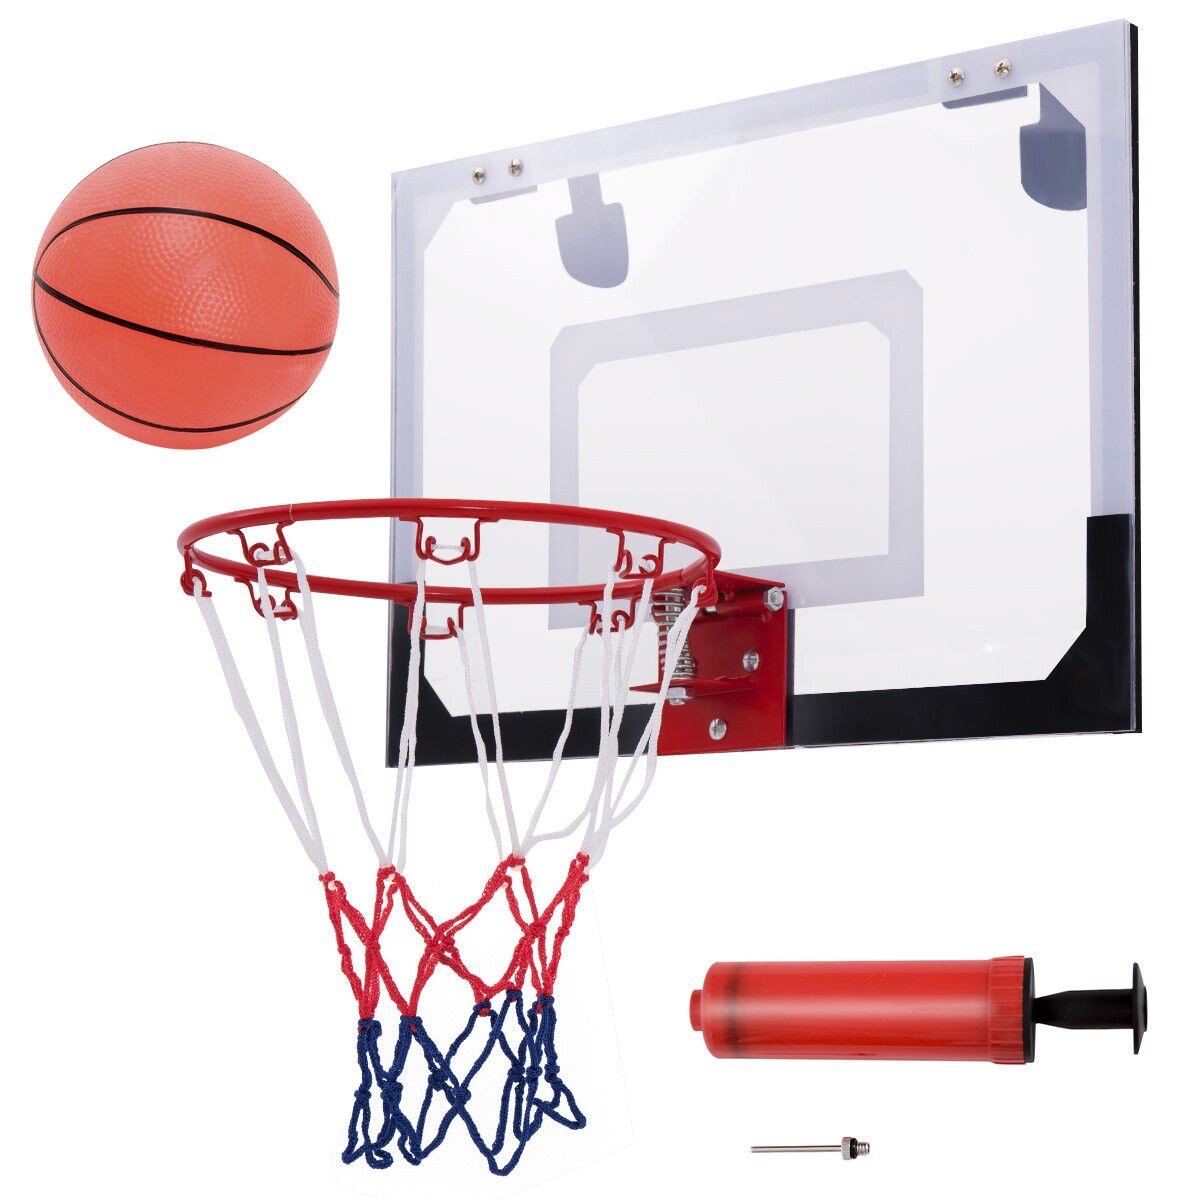 USA! Mini Basketball Hoop System Over the Door Indoor Office Play Game Rim Ball 